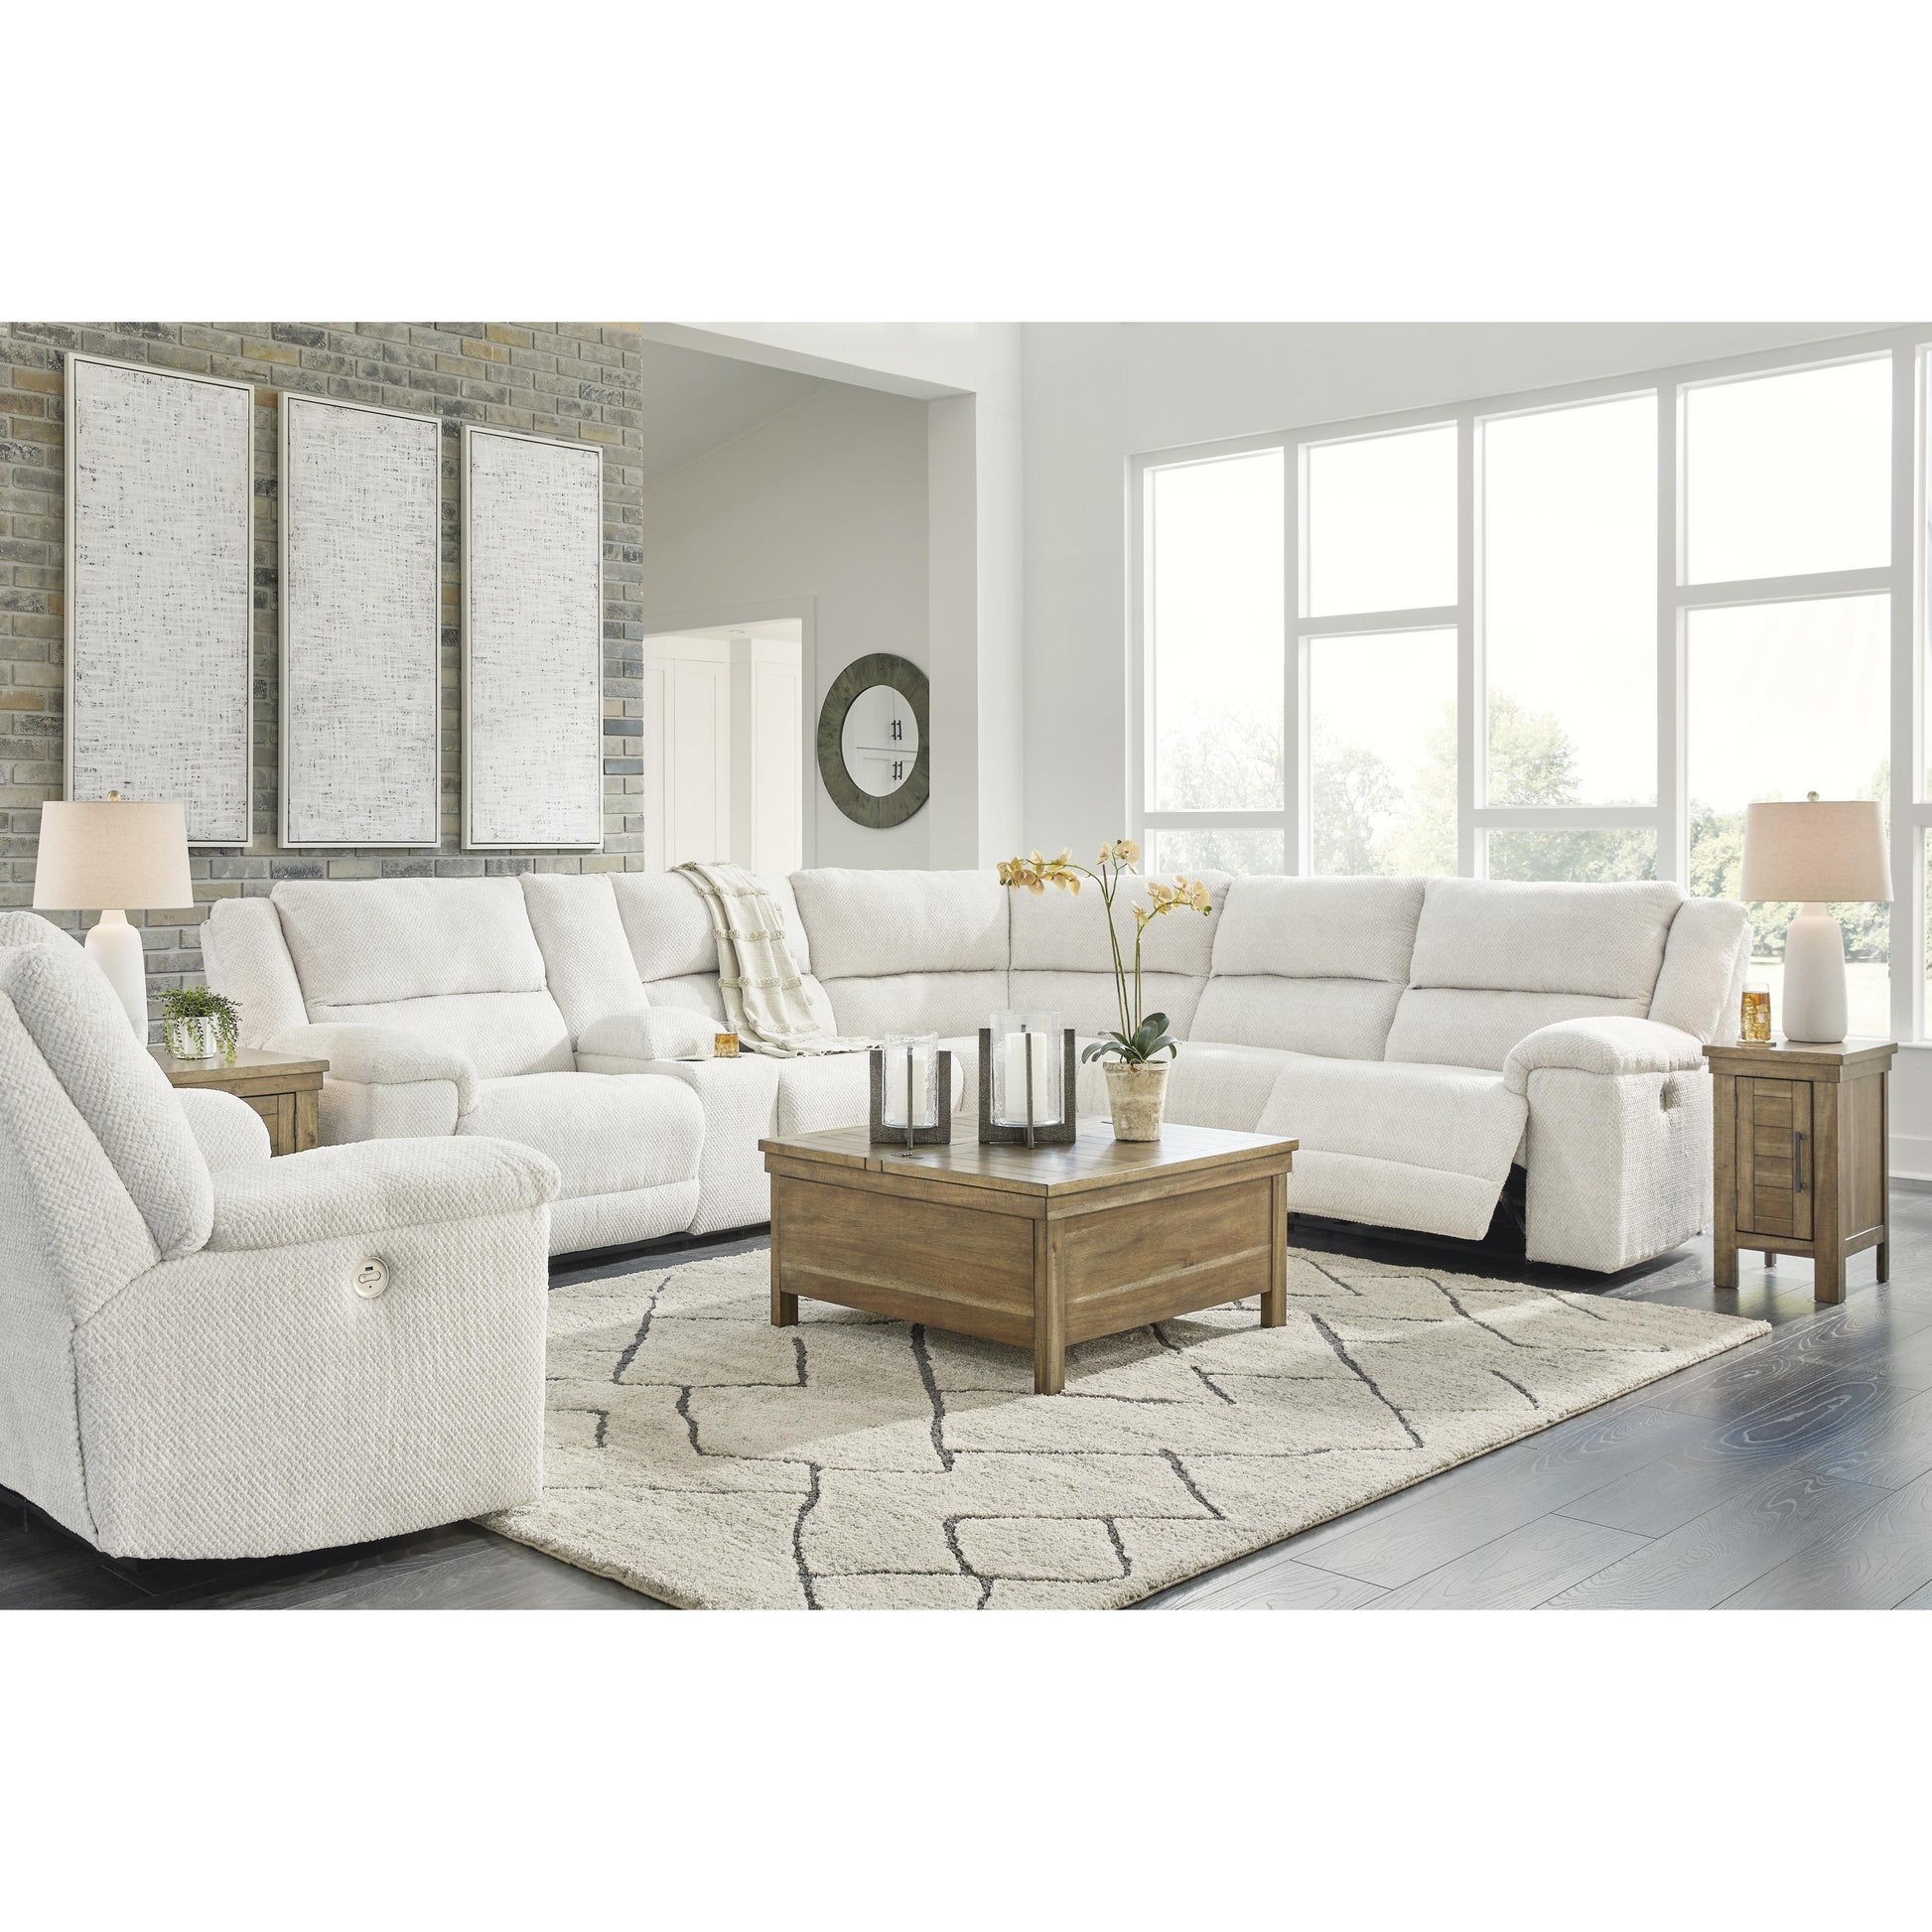 Signature Design by Ashley Keensburg Power Reclining Fabric 3 pc Sectional 6180701/6180777/6180775 IMAGE 4